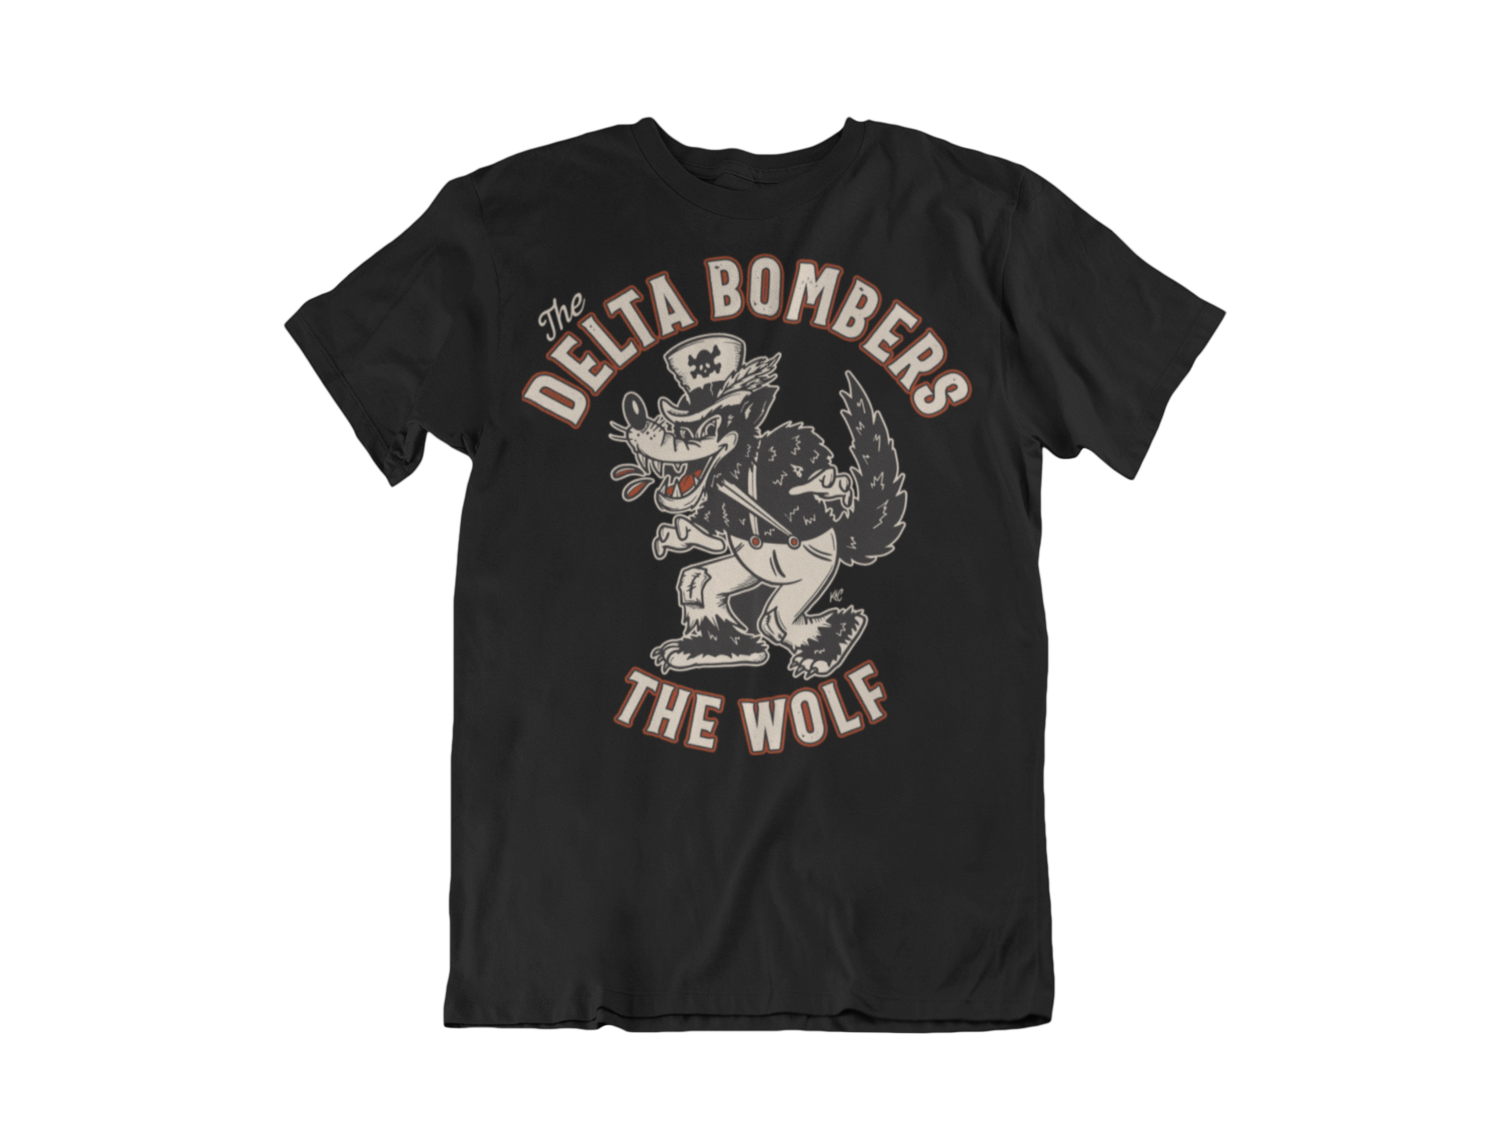 THE DELTA BOMBERS T-SHIRT "CARTOON WOLF" for MEN